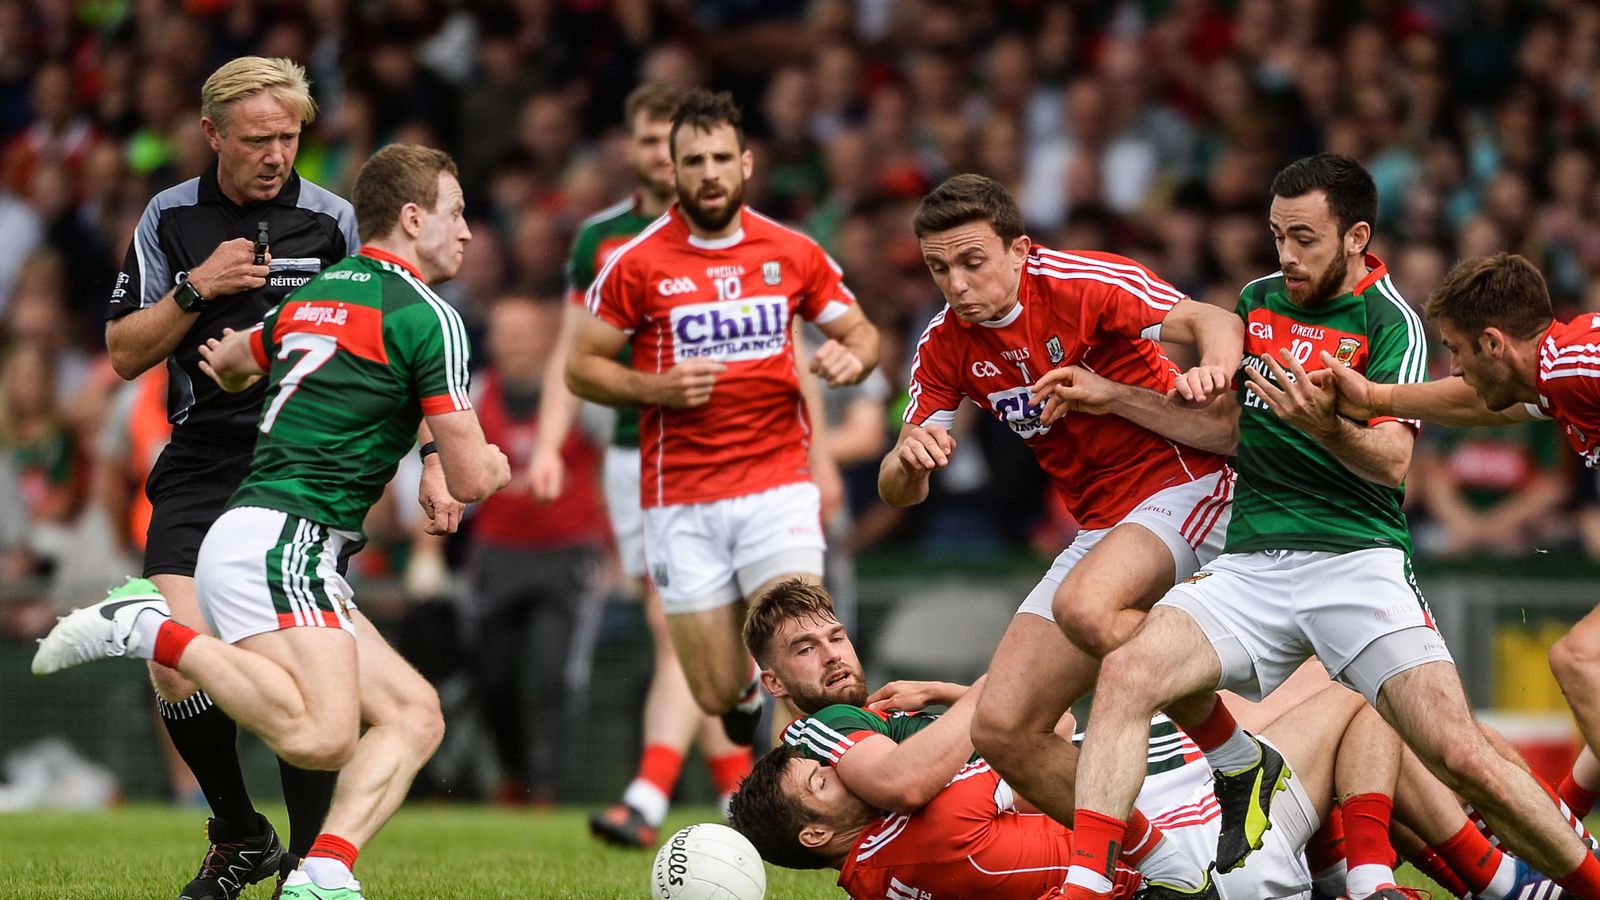 GAA: Mayo beat Cork 0-27 to 2-20 in extra-time thriller ...